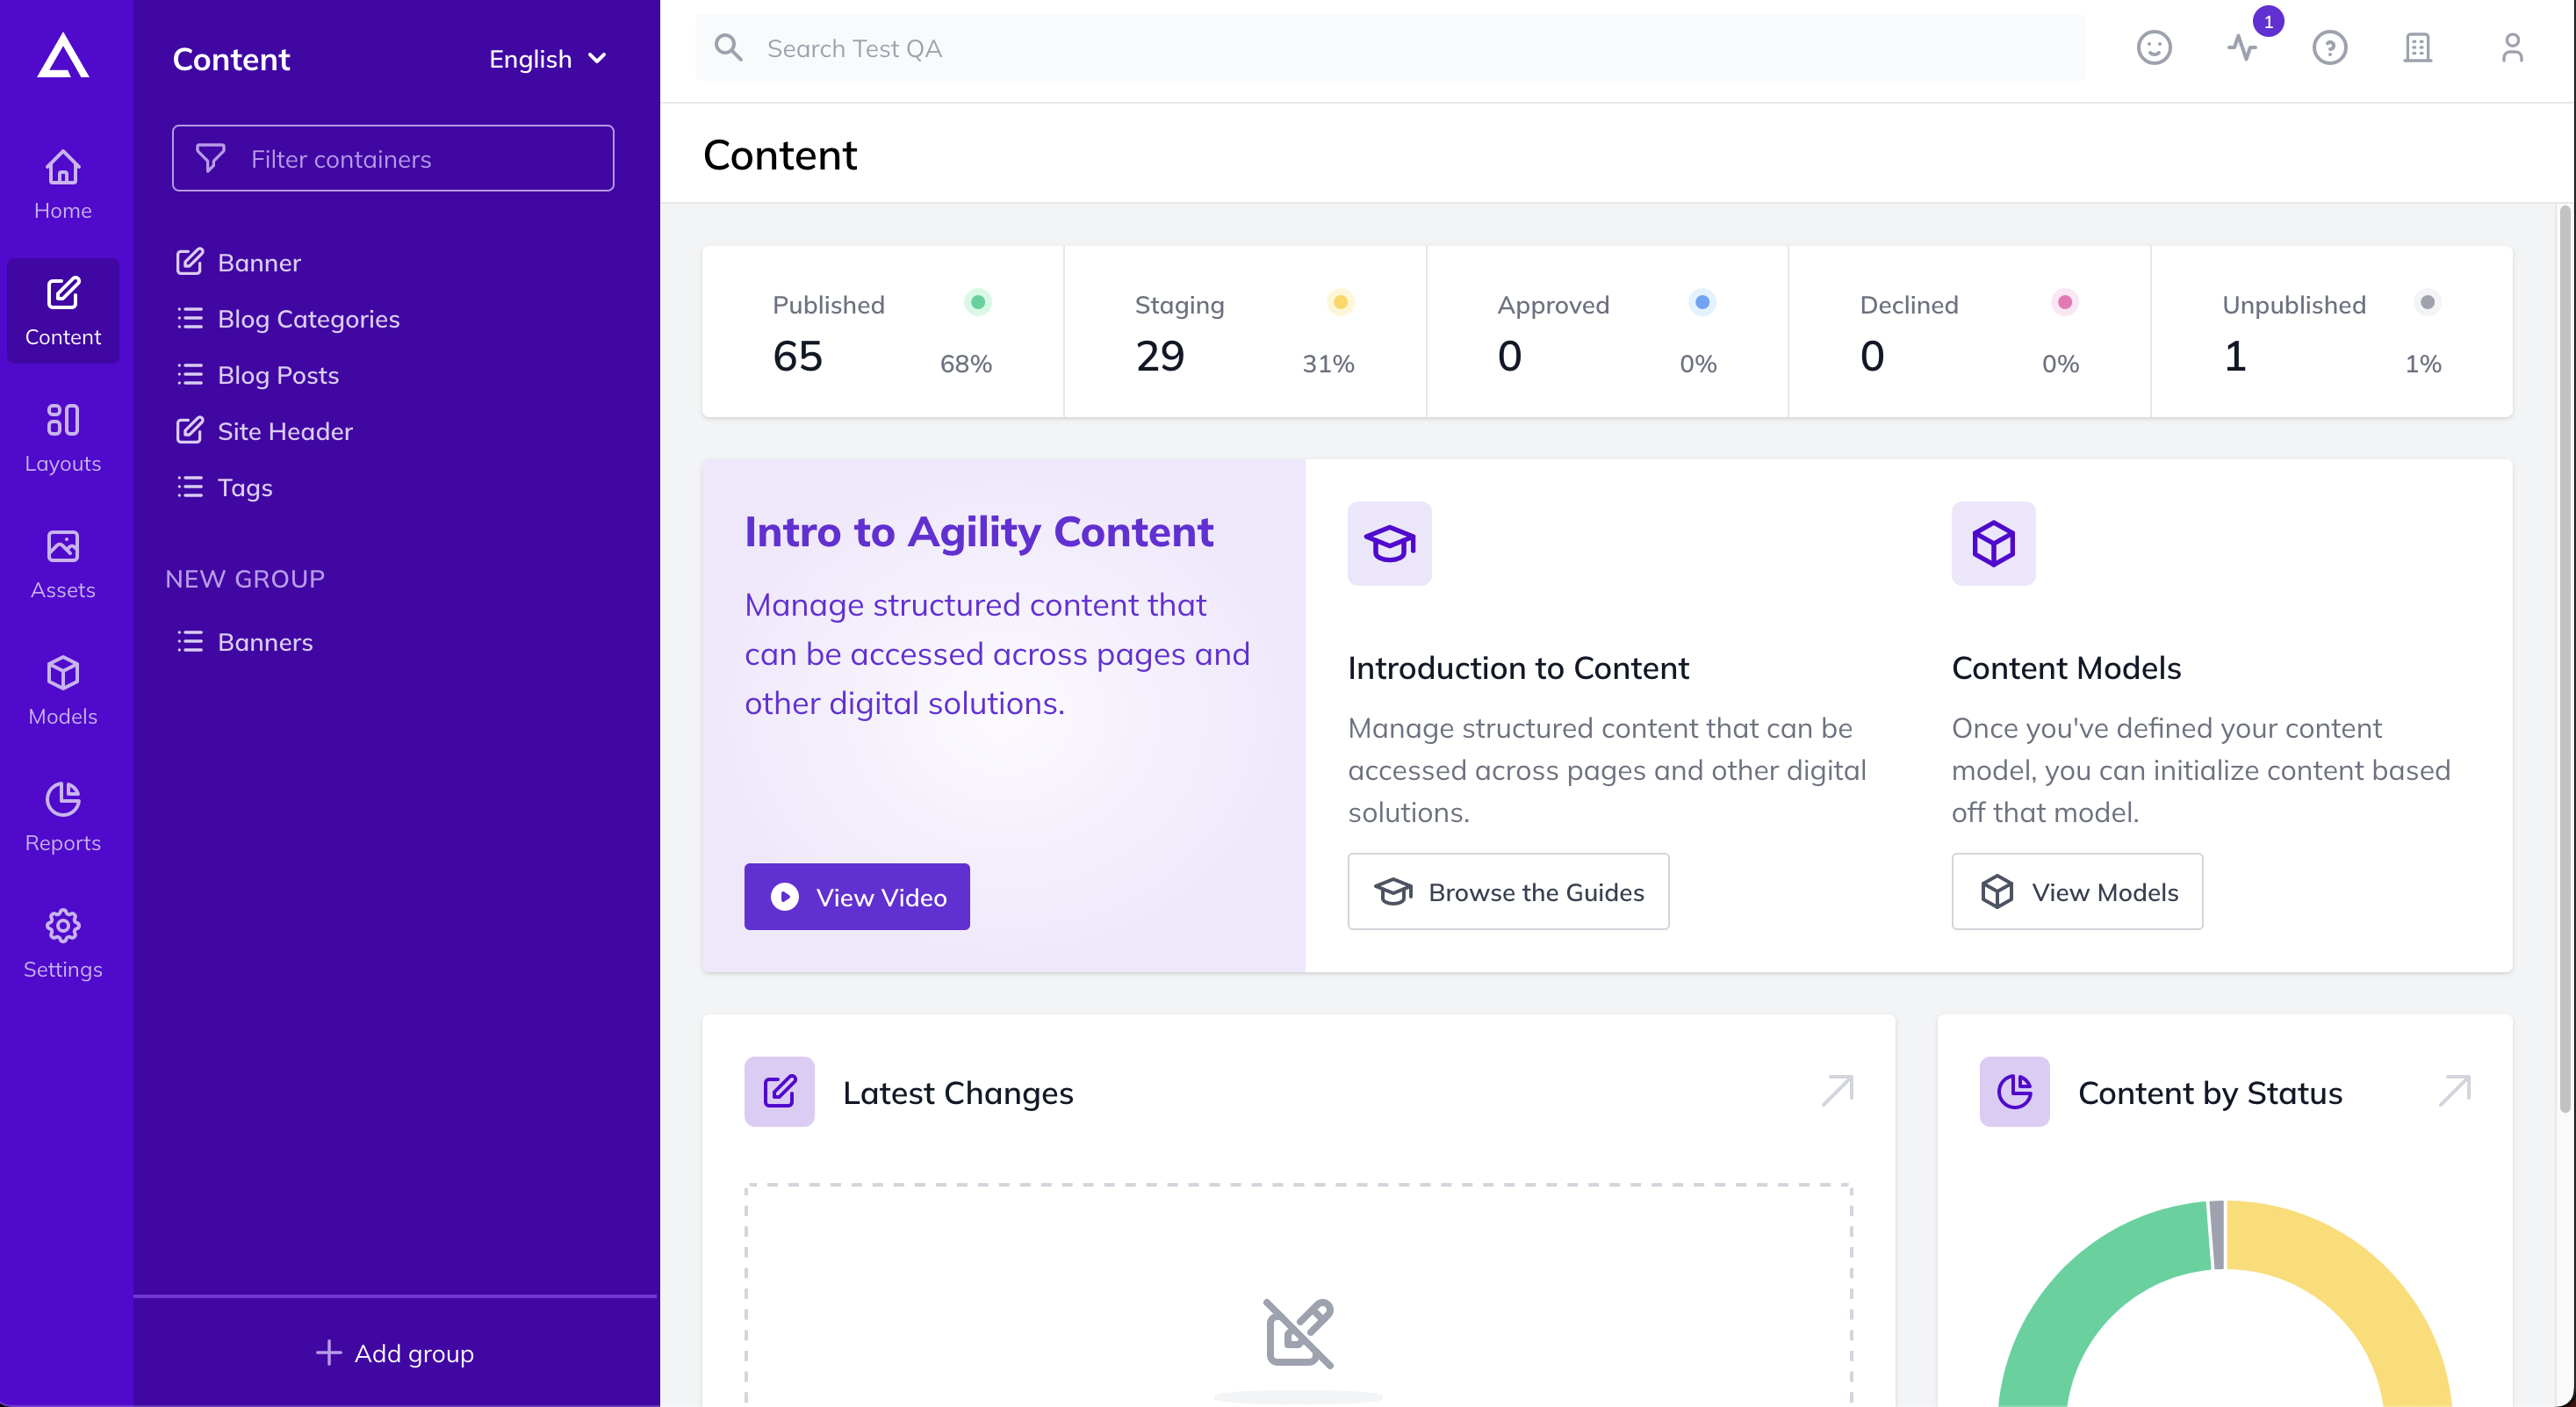 View of the Agility Content dashboard showing content reports, welcome guides, latest changes, and content status